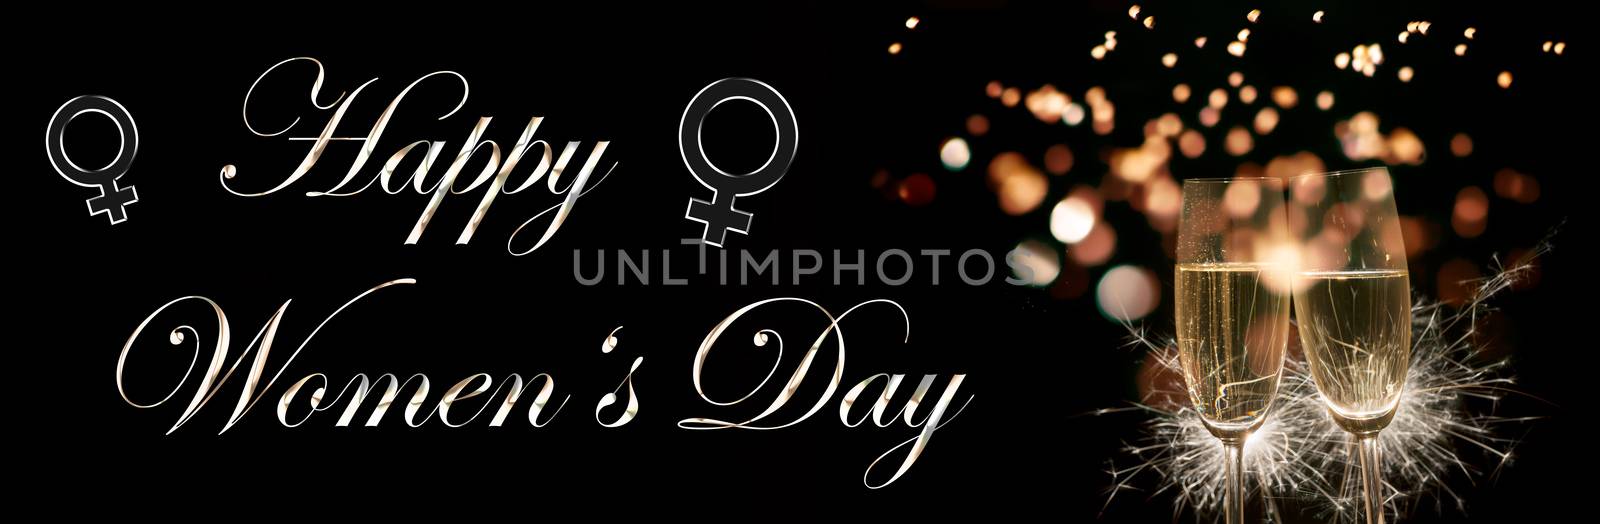 Card Happy Women's Day with two champagne glasses and women's si by w20er